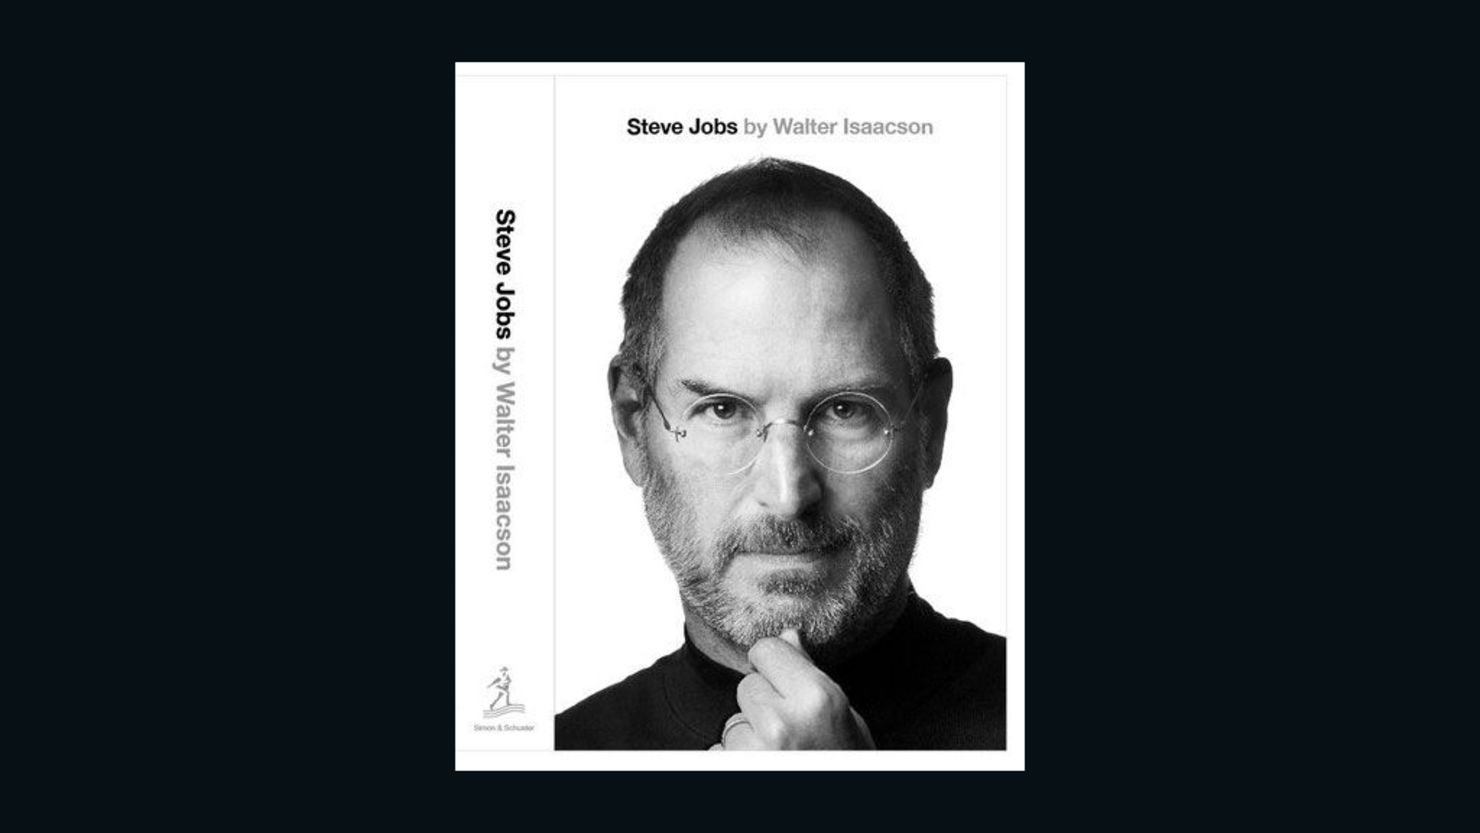 The cover of "Steve Jobs," by Walter Isaacson, to be published later this month by Simon & Schuster.